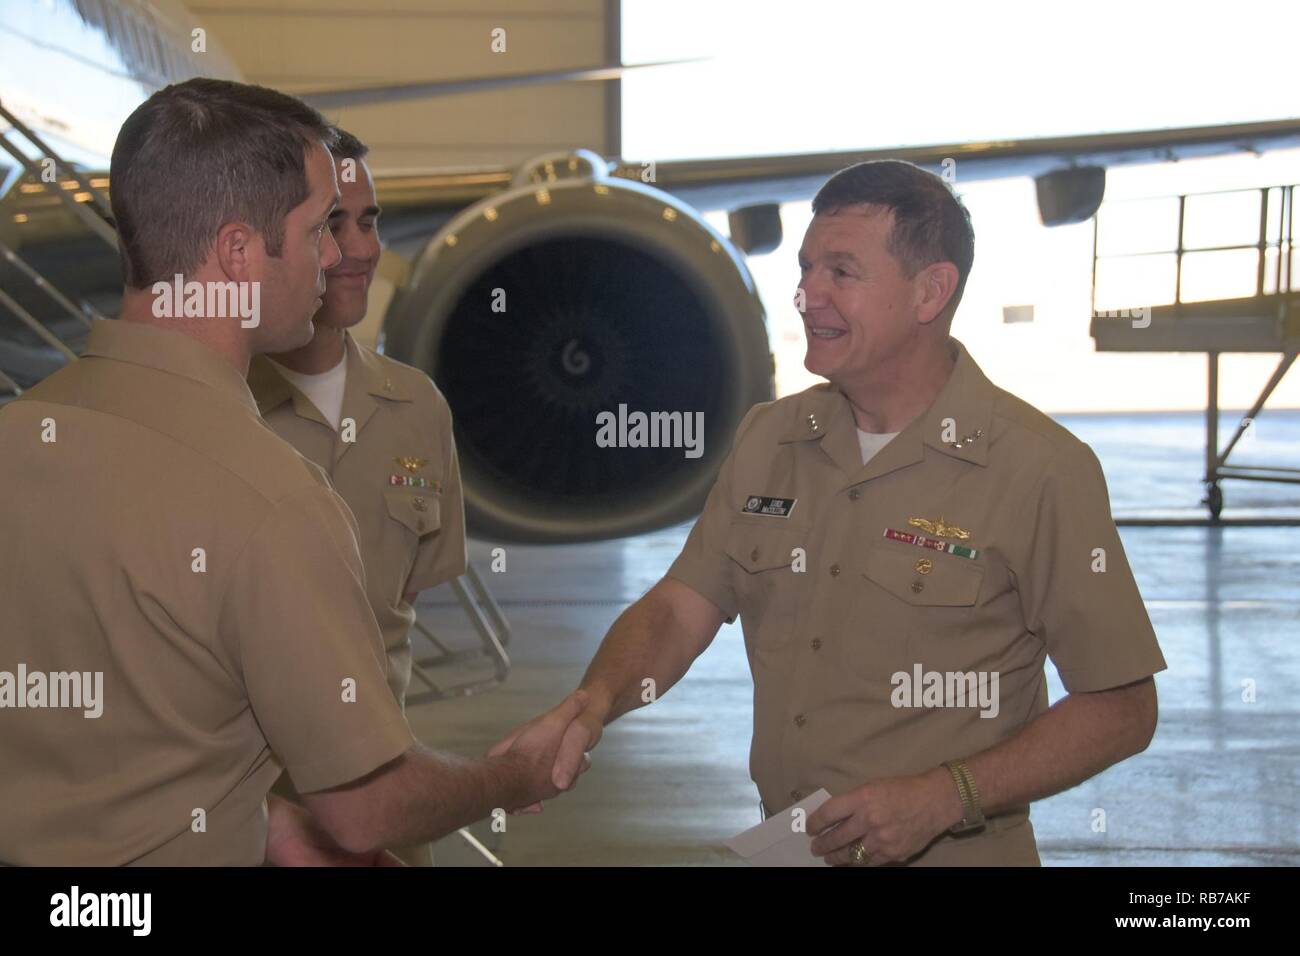 FORT WORTH, Texas (Dec. 1, 2016) Vice Adm. Luke McCollum, chief of Navy Reserve/commander, Navy Reserve Force, meets Cmdr. Robert Stanley, commanding officer of Fleet Logistics Support Squadron (VR) 59, during a tour of a C-40A 'Clipper' at Naval Air Station Fort Worth Joint Reserve Base.  McCollum, formerly deputy commander of the Navy Expeditionary Combat Command, became the 14th chief of Navy Reserve/commander, Navy Reserve Force Sept. 2016. Stock Photo